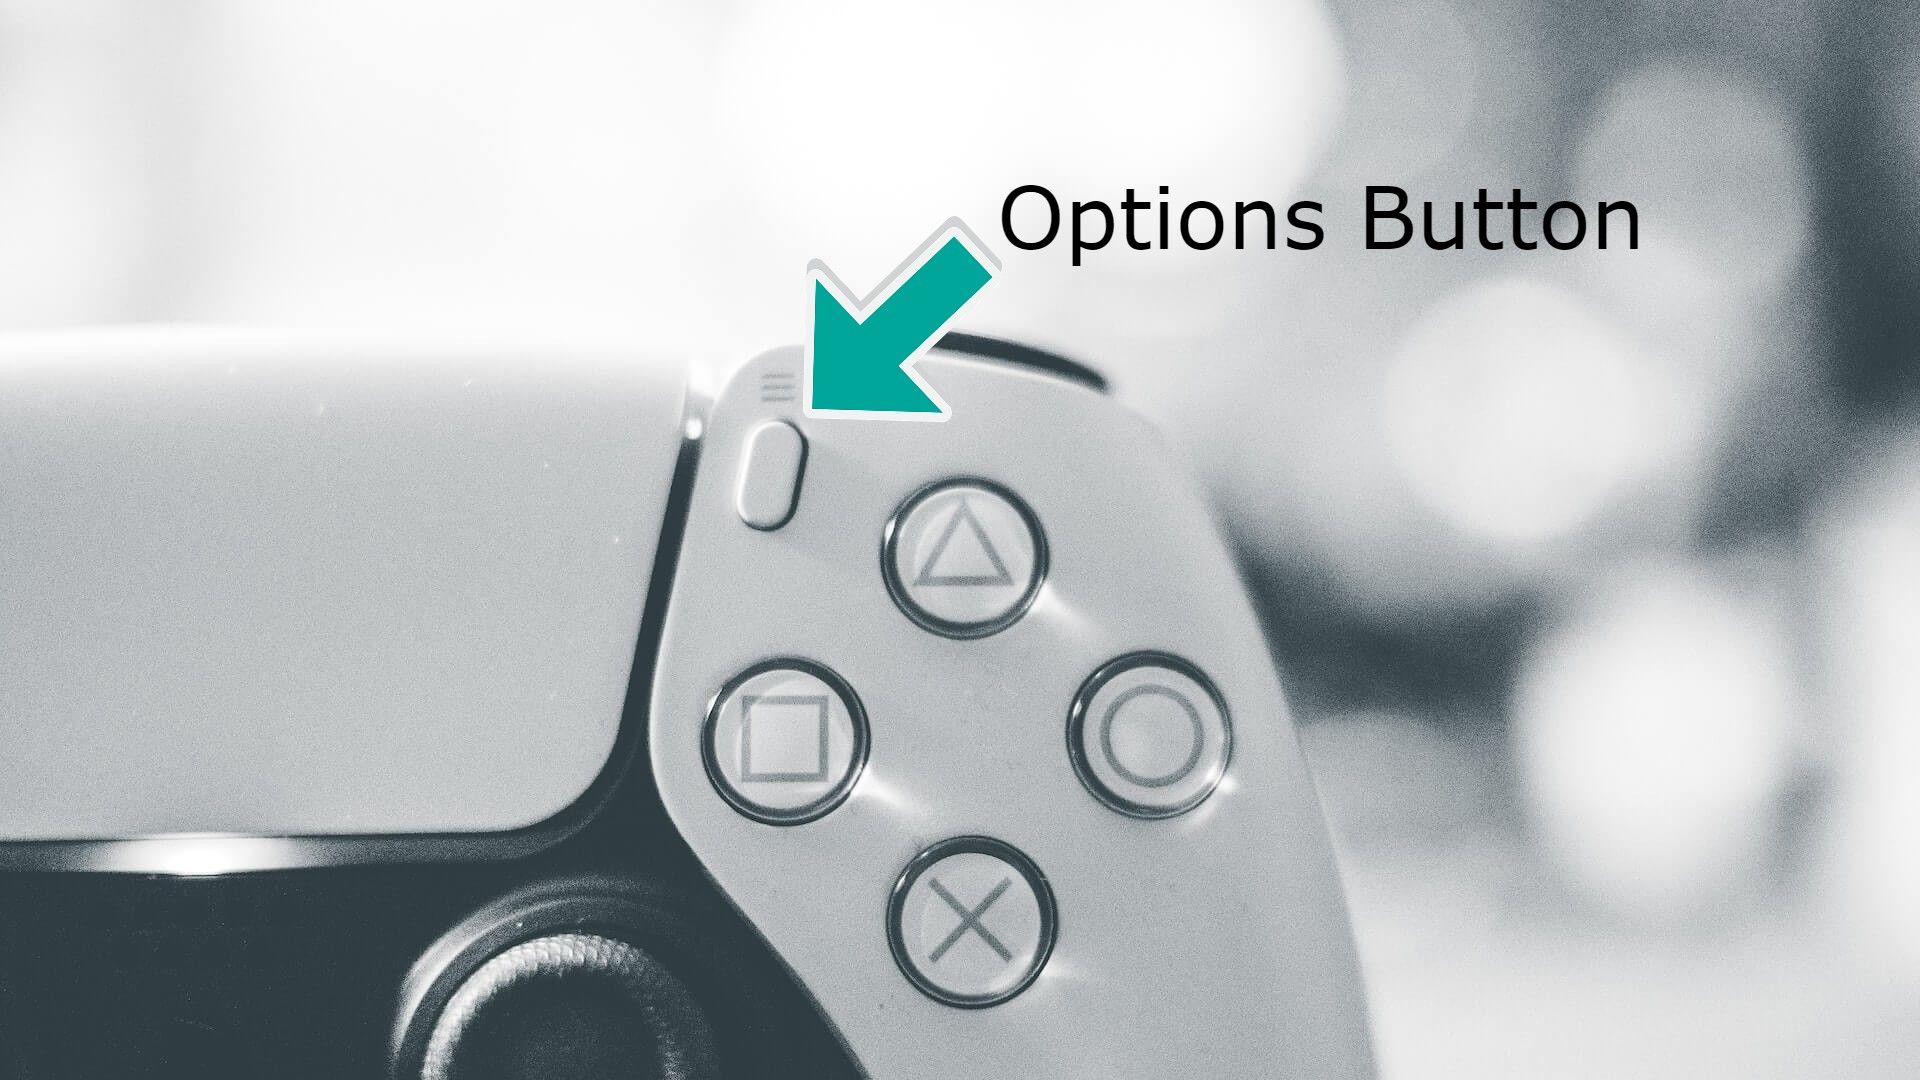 PS5 controller options button